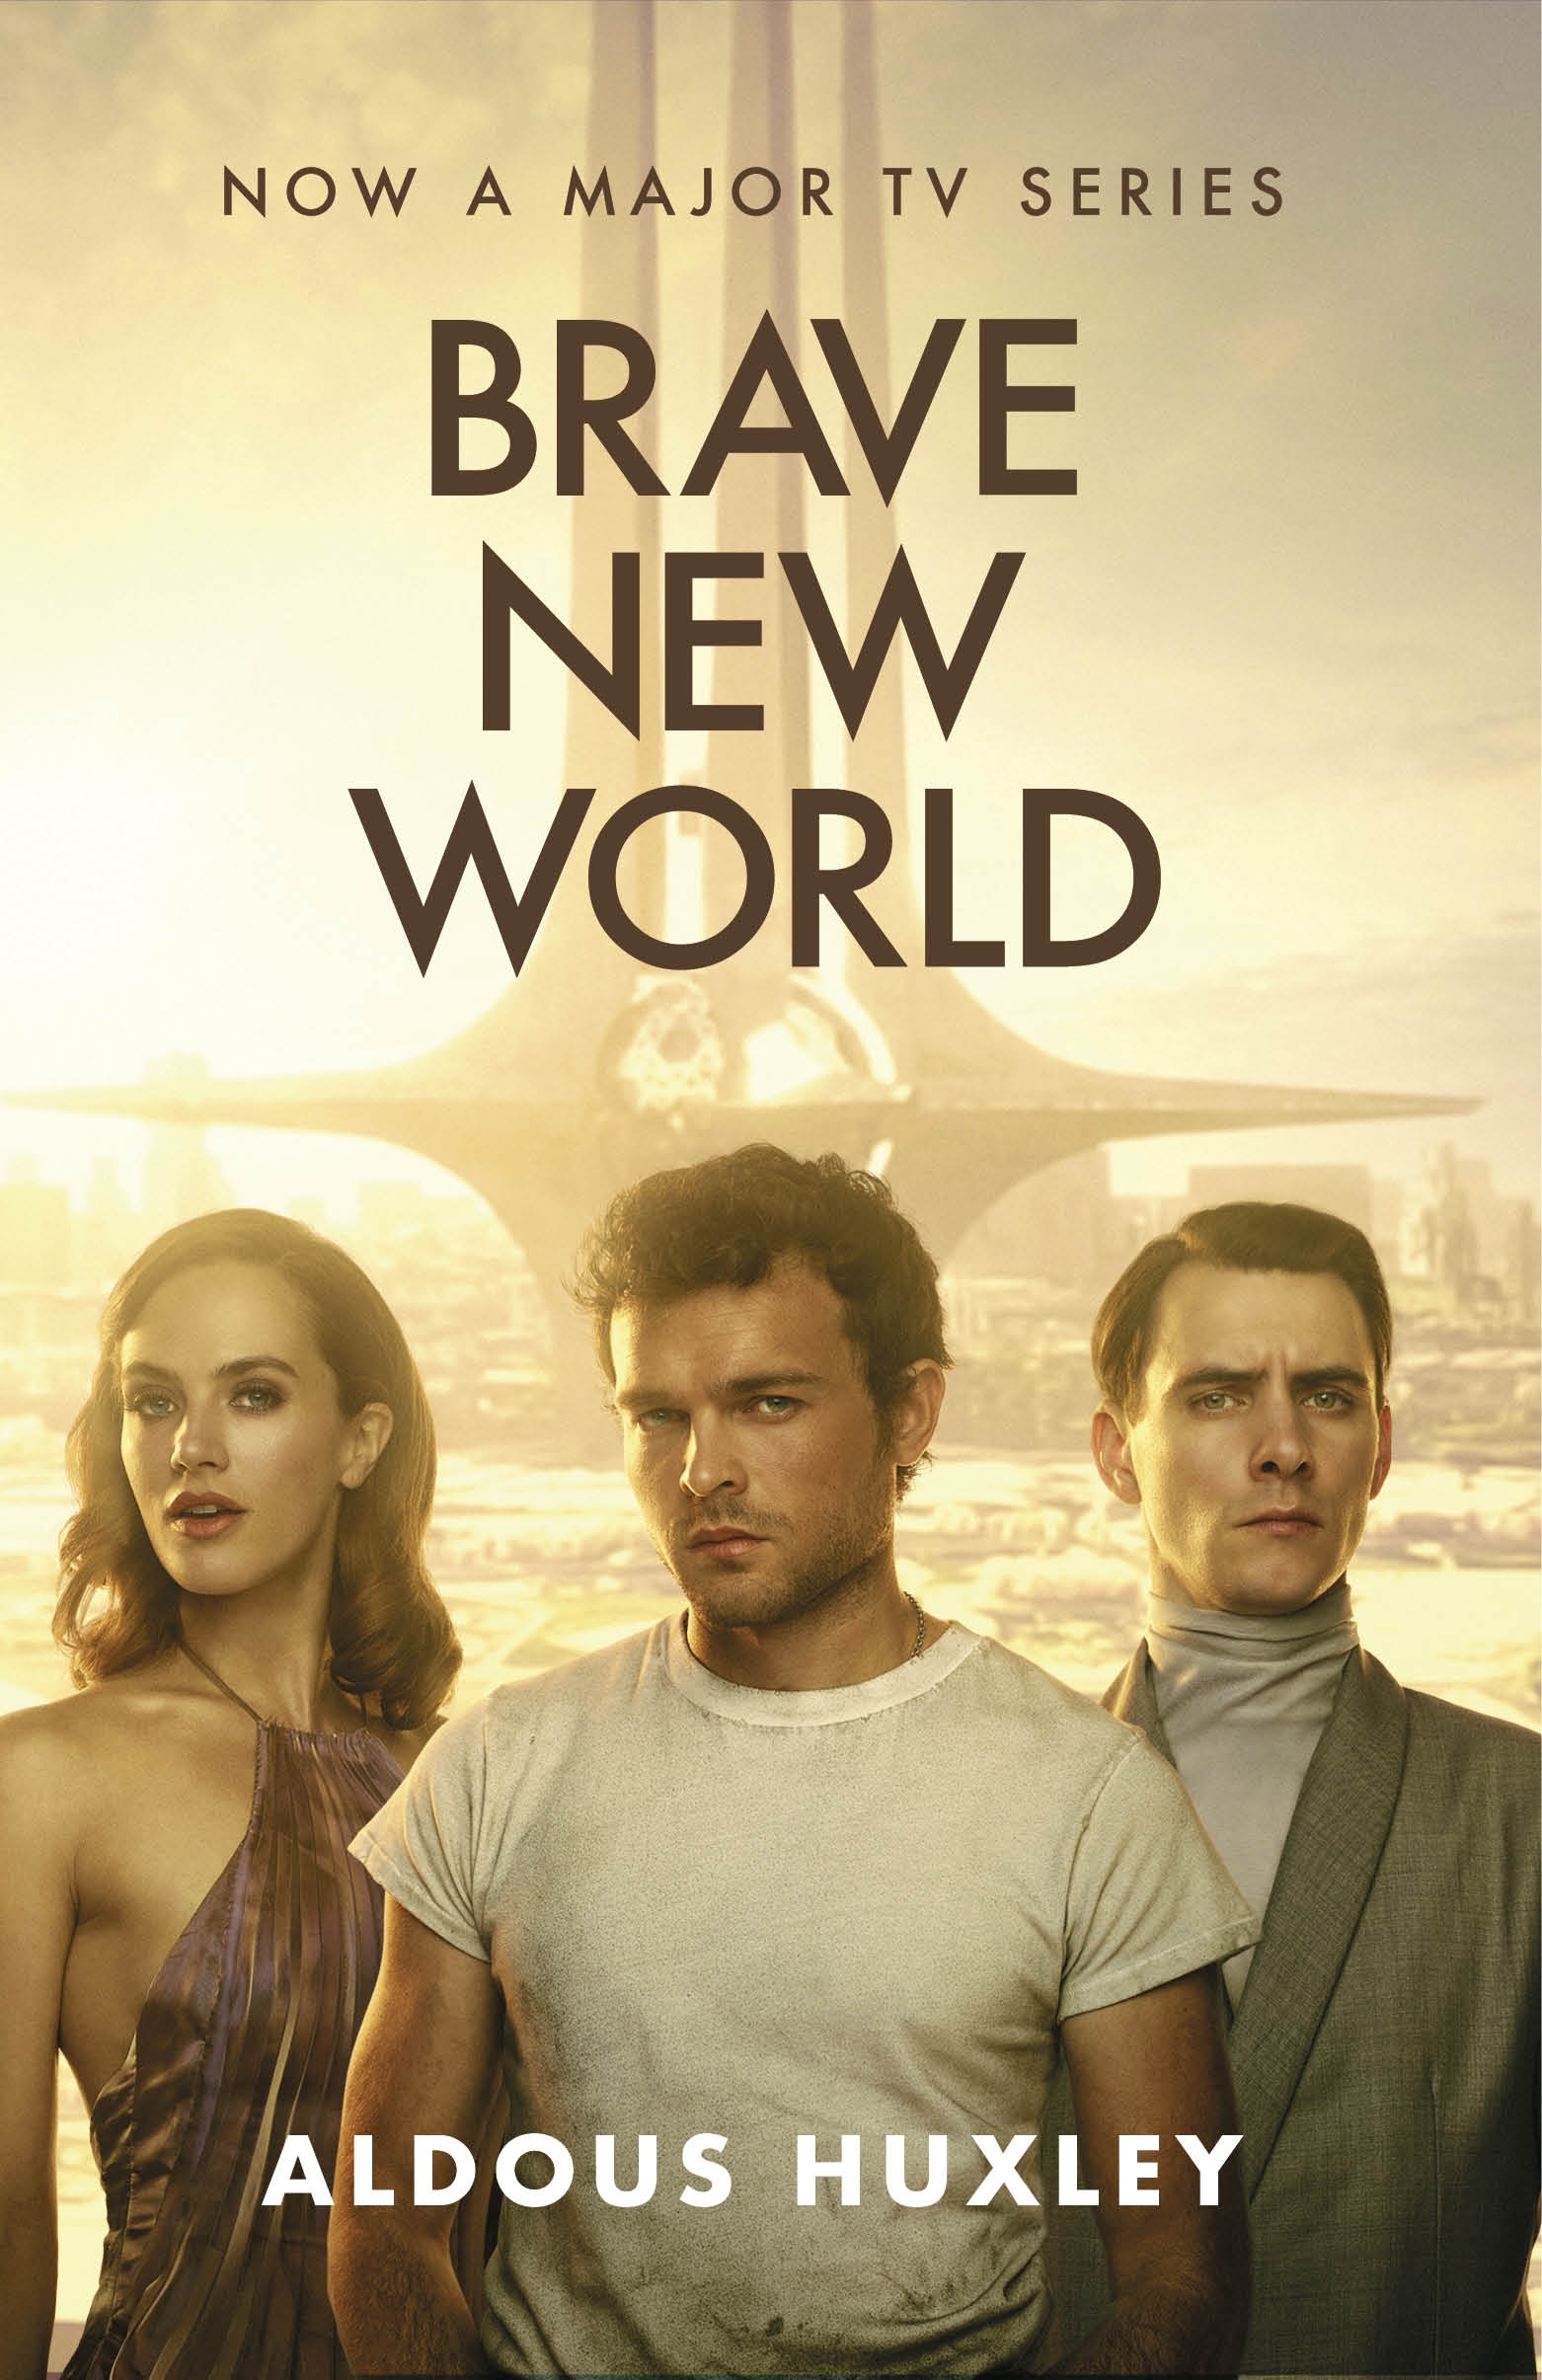 is the brave new world movie like the book